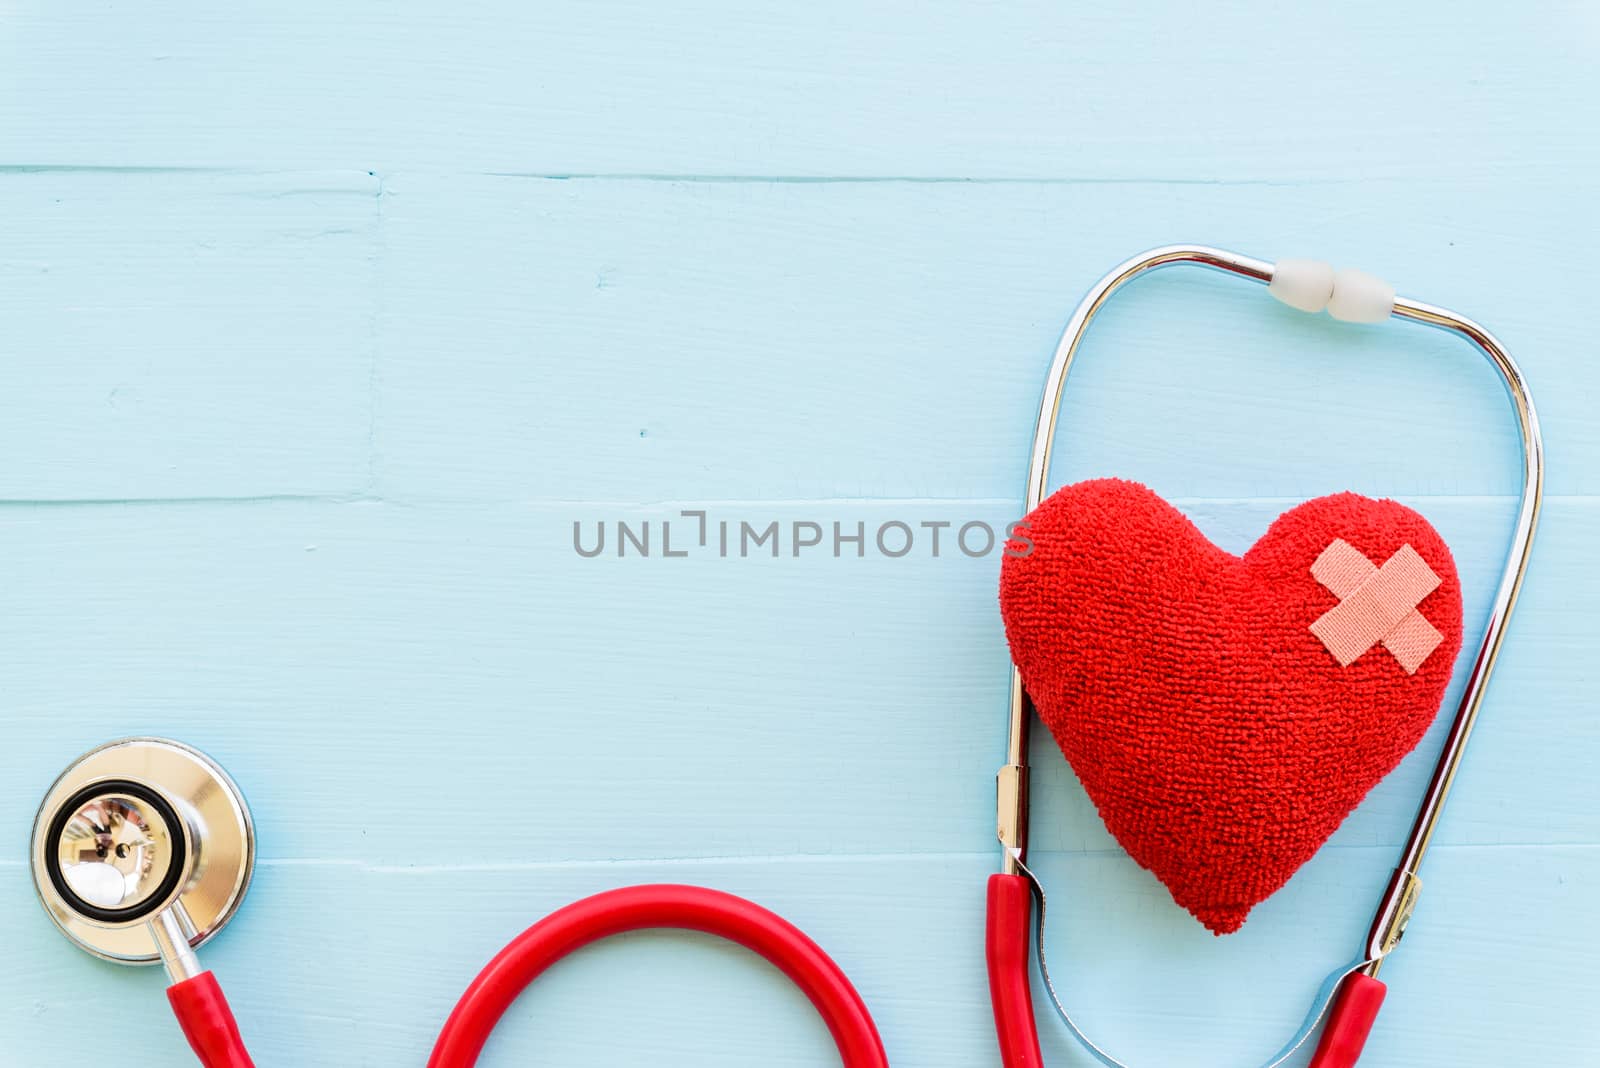 World health day, Healthcare and medical concept. Woman hand holding red heart with Stethoscope, notepad or notebook, thermometer and yellow Pill on Pastel white and blue wooden table background texture.